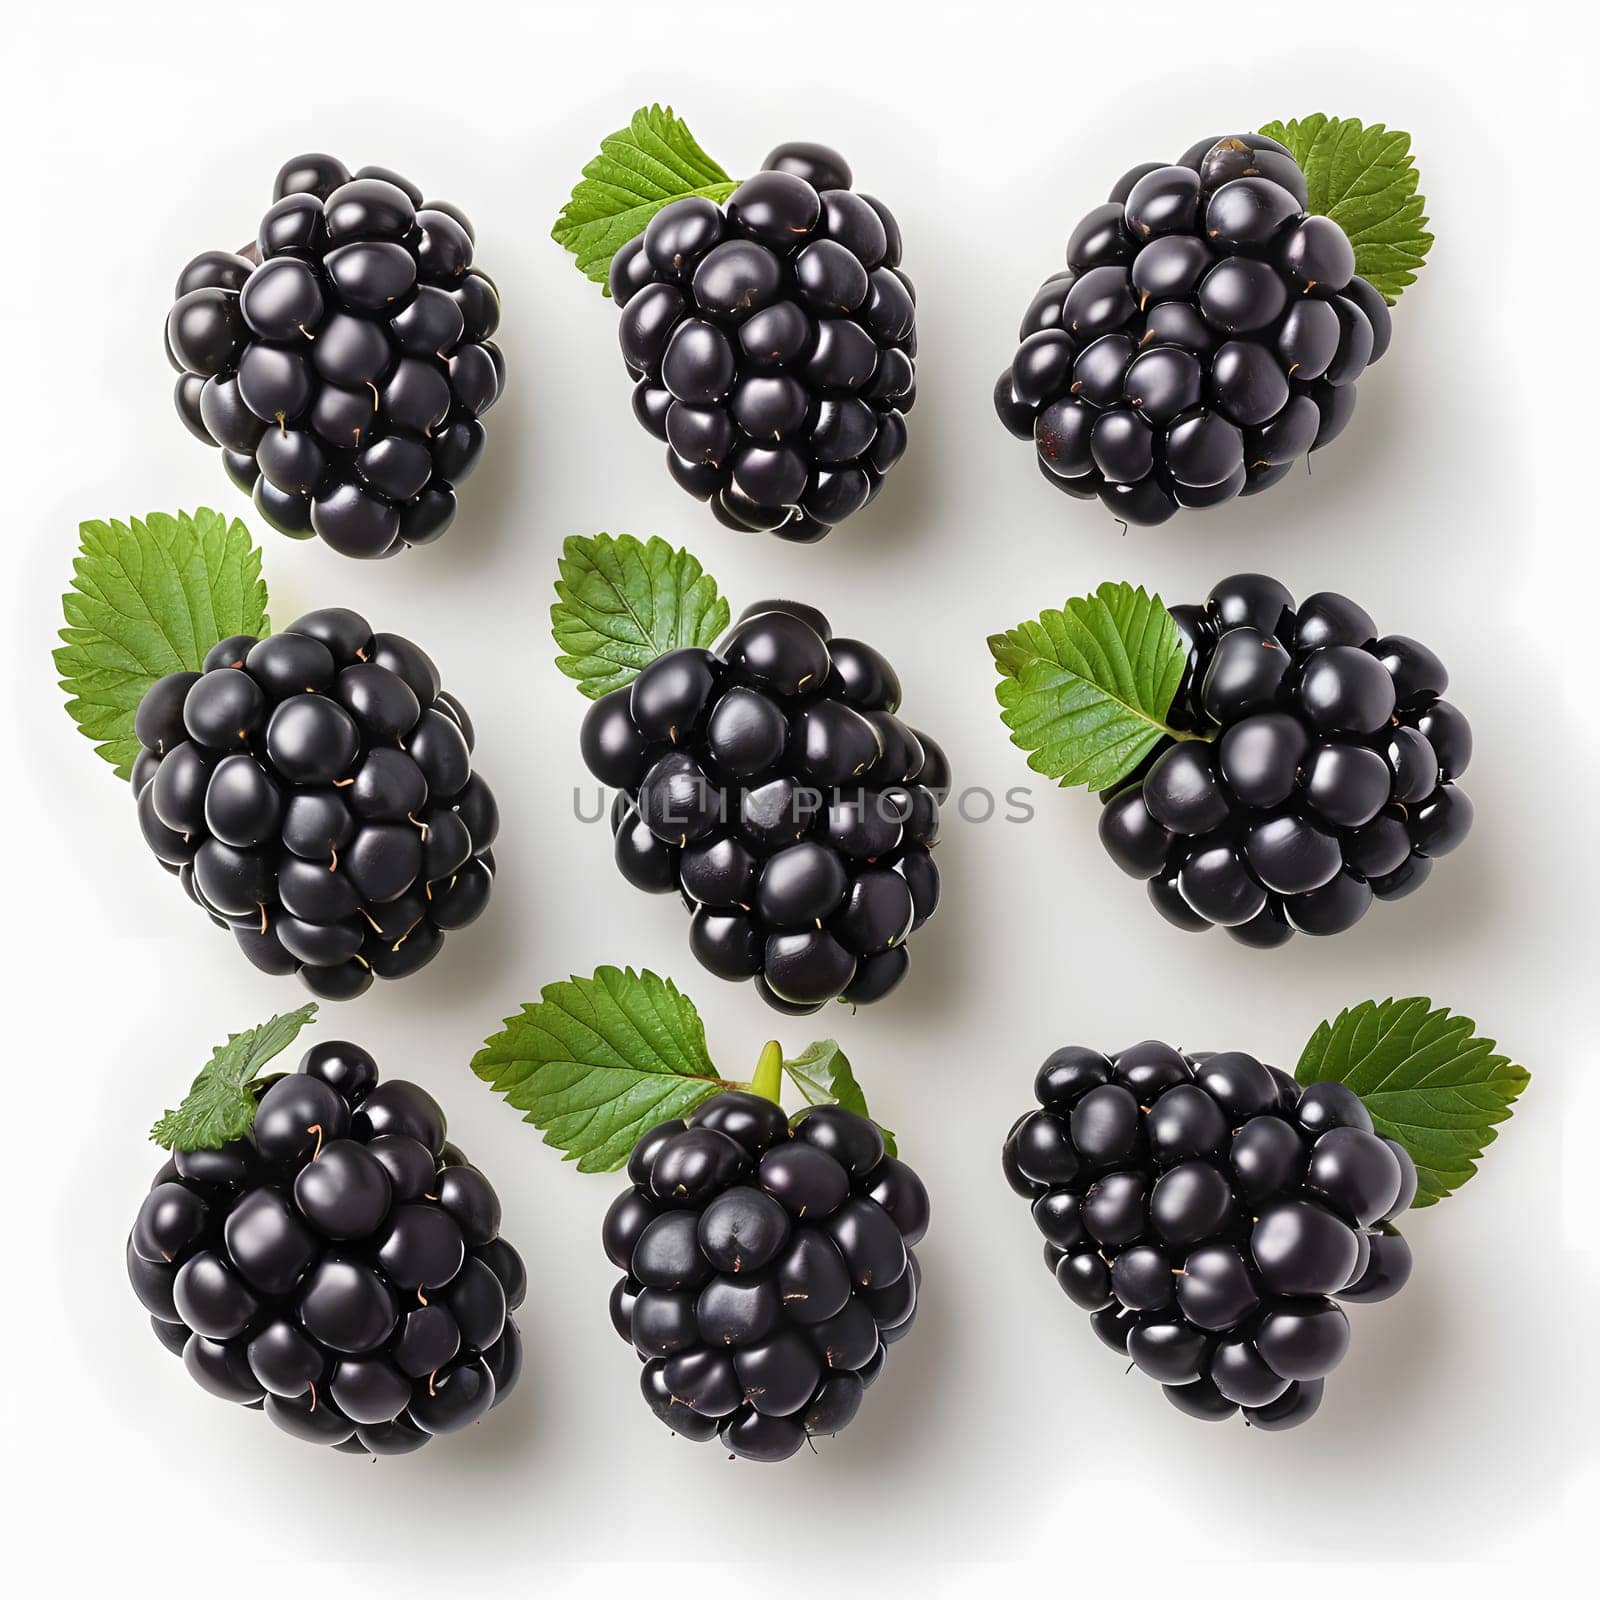 a bunch of blackberries with green leaves on a white background by Nadtochiy